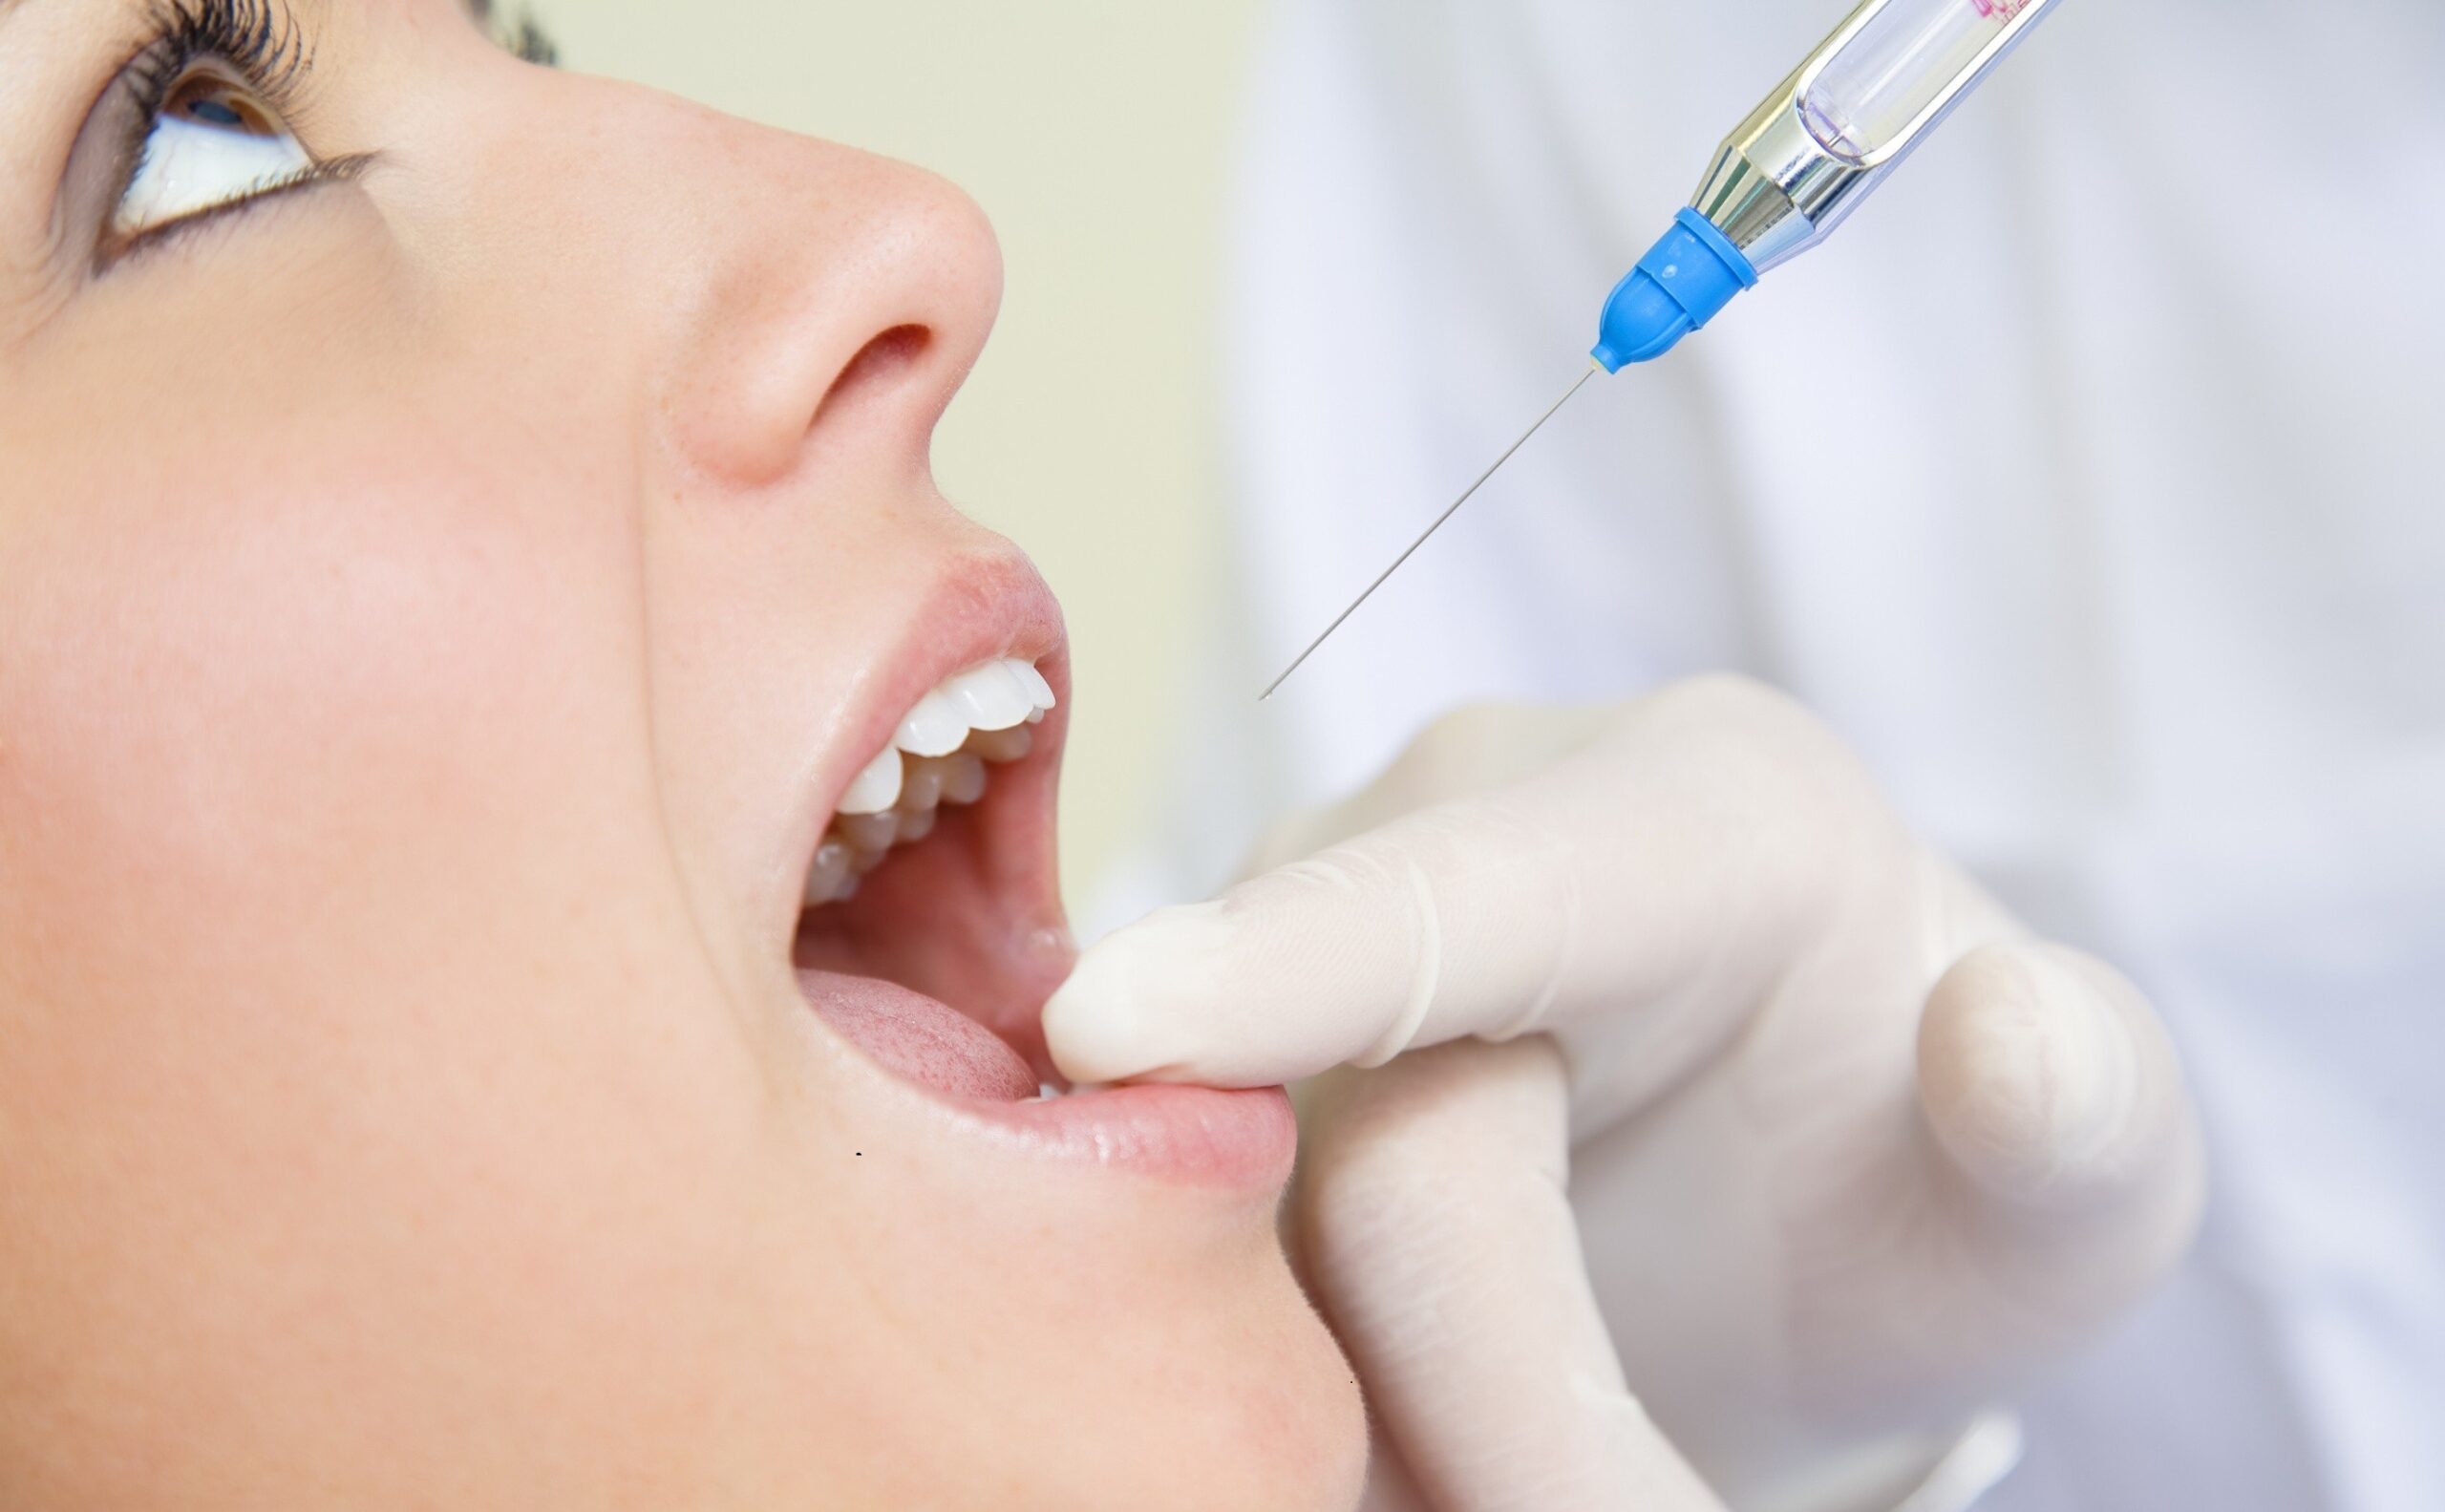 What Local Anesthesia Do Dentists Use?